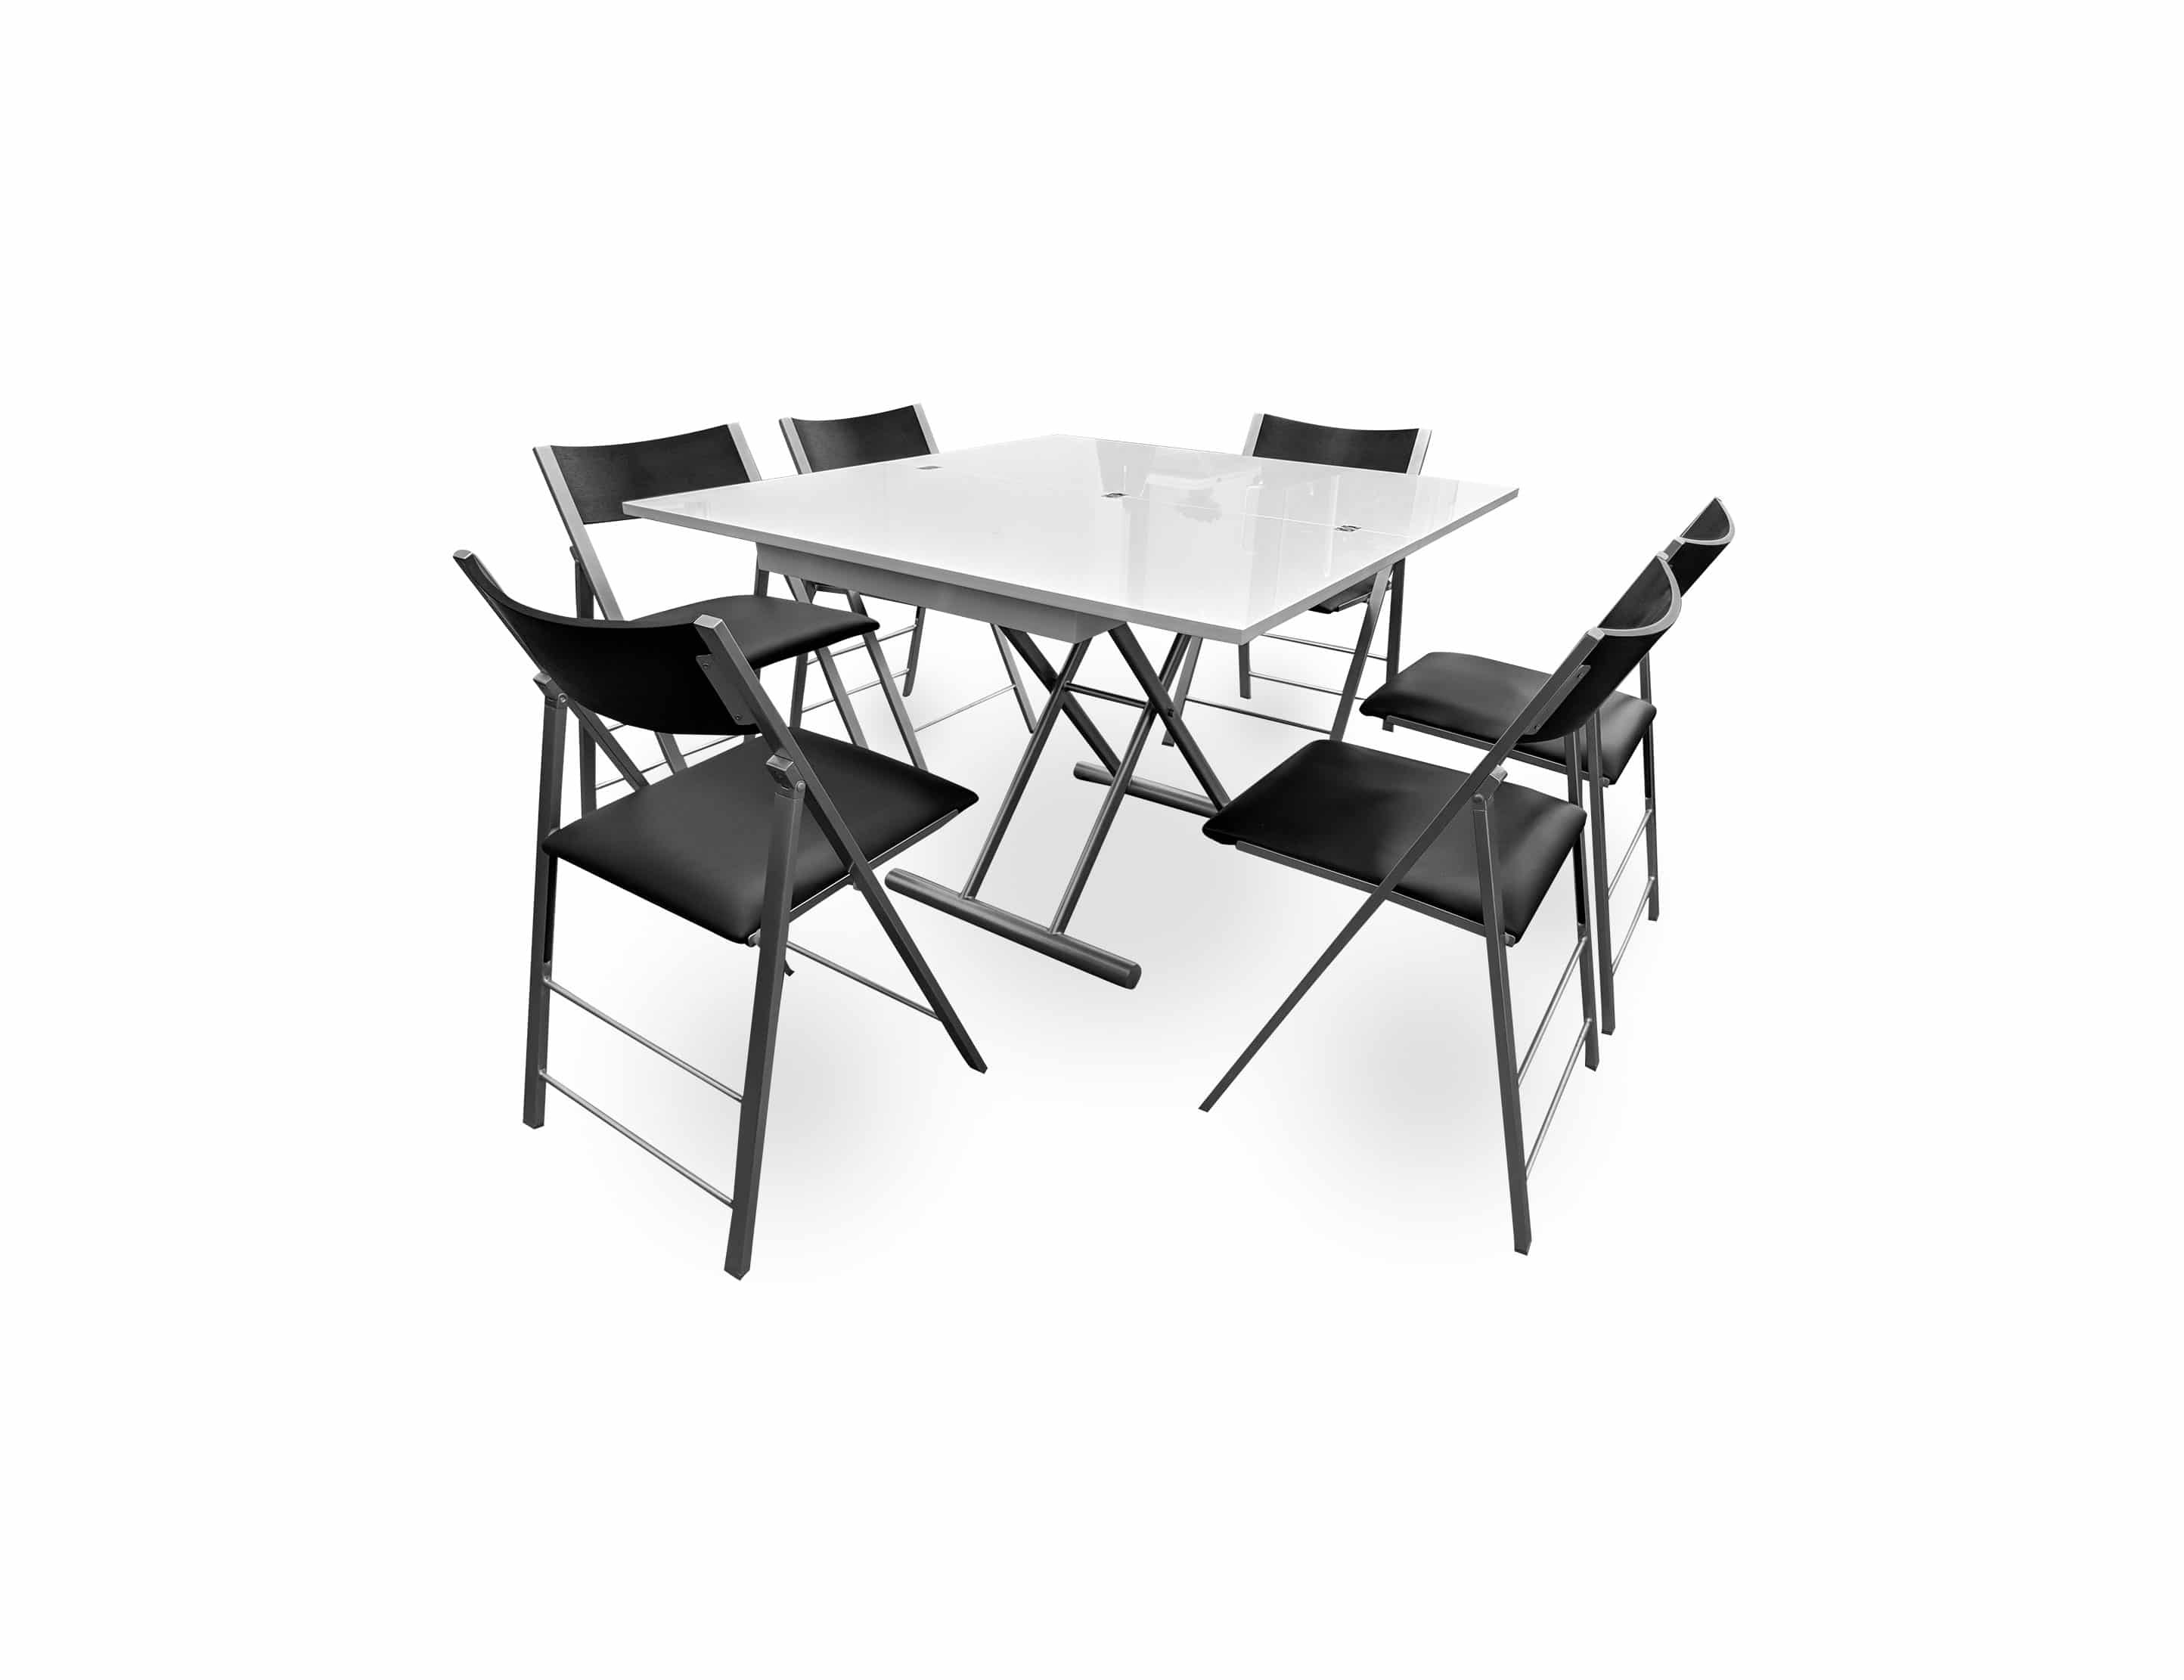 The Alzare Raising Coffee Dining Table Set Expand Furniture Folding Tables Smarter Wall Beds Space Savers